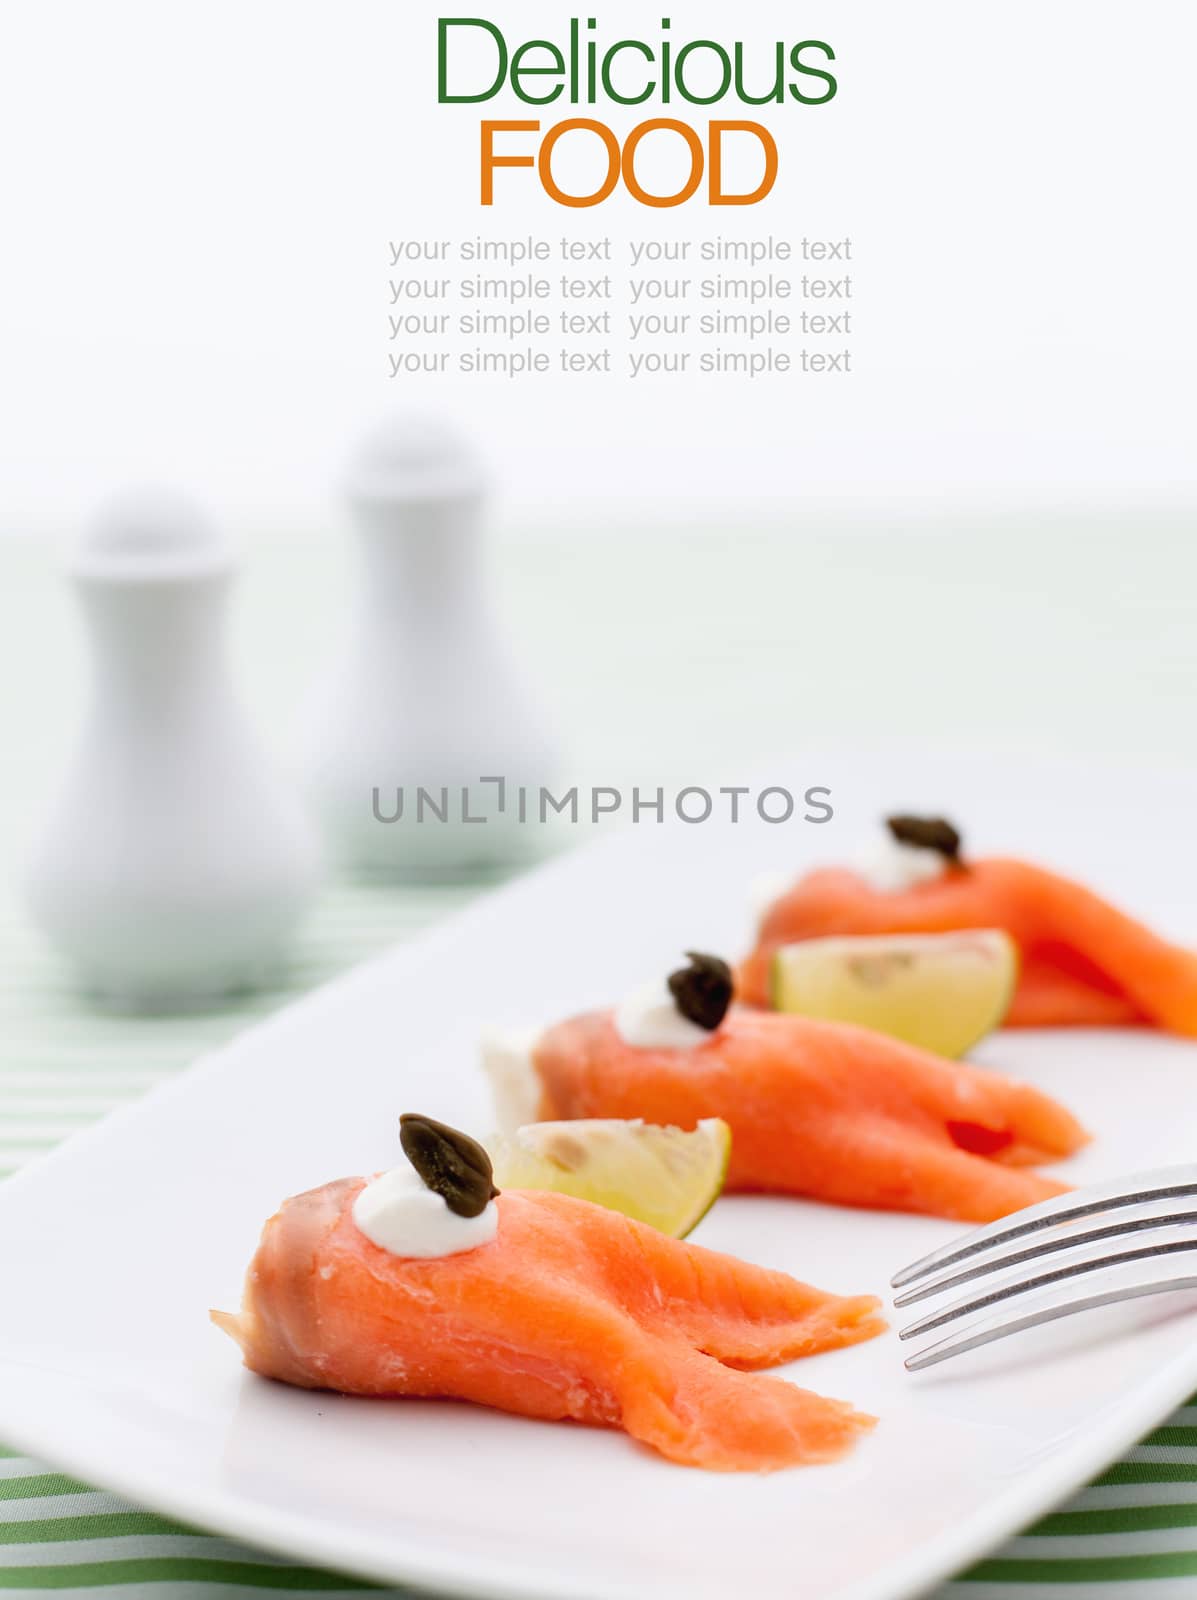 Smoked salmon roll with cream cheese. by kerdkanno